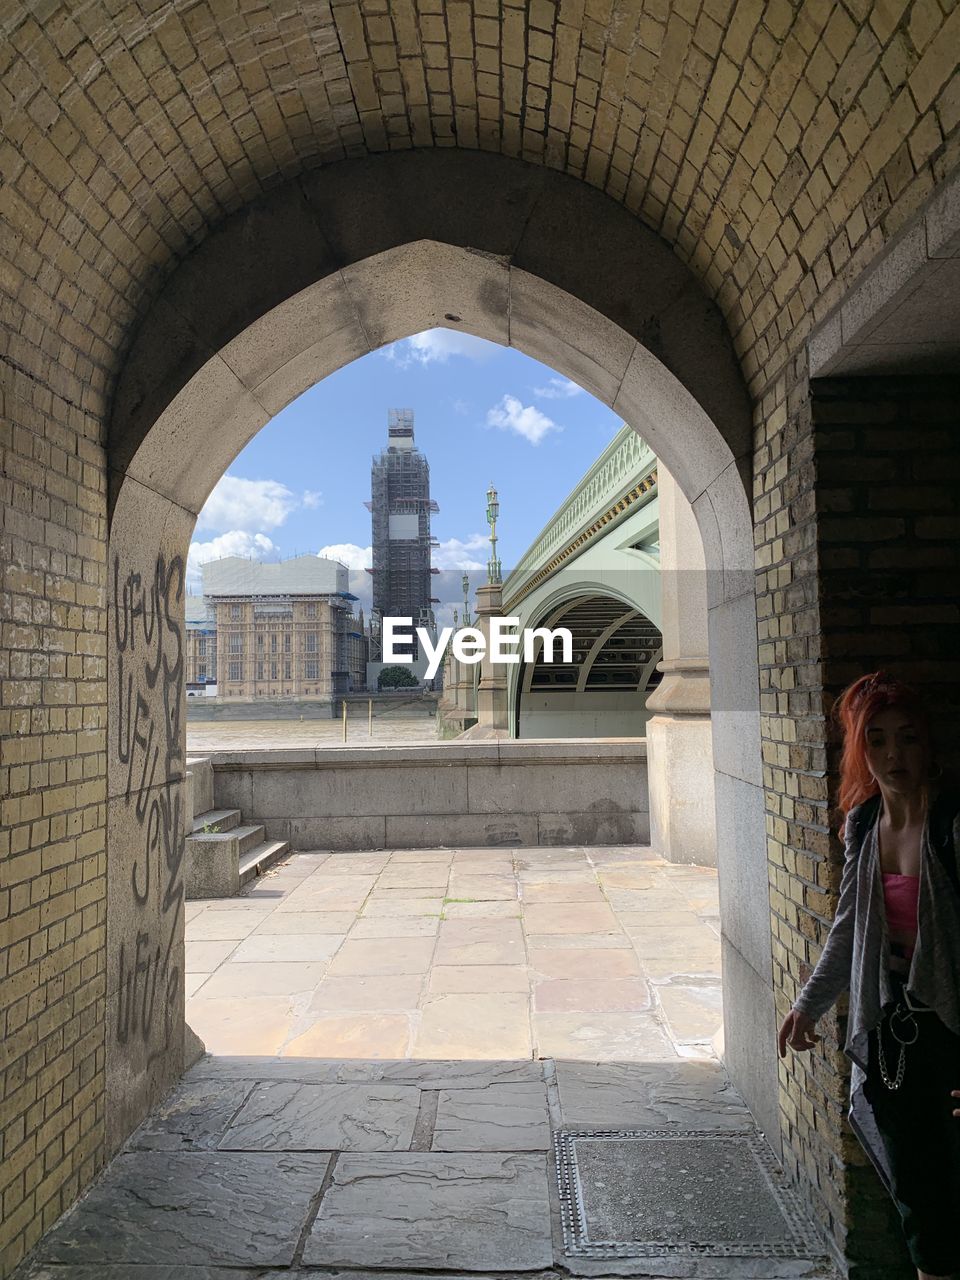 VIEW OF HISTORIC BUILDING SEEN THROUGH ARCHWAY